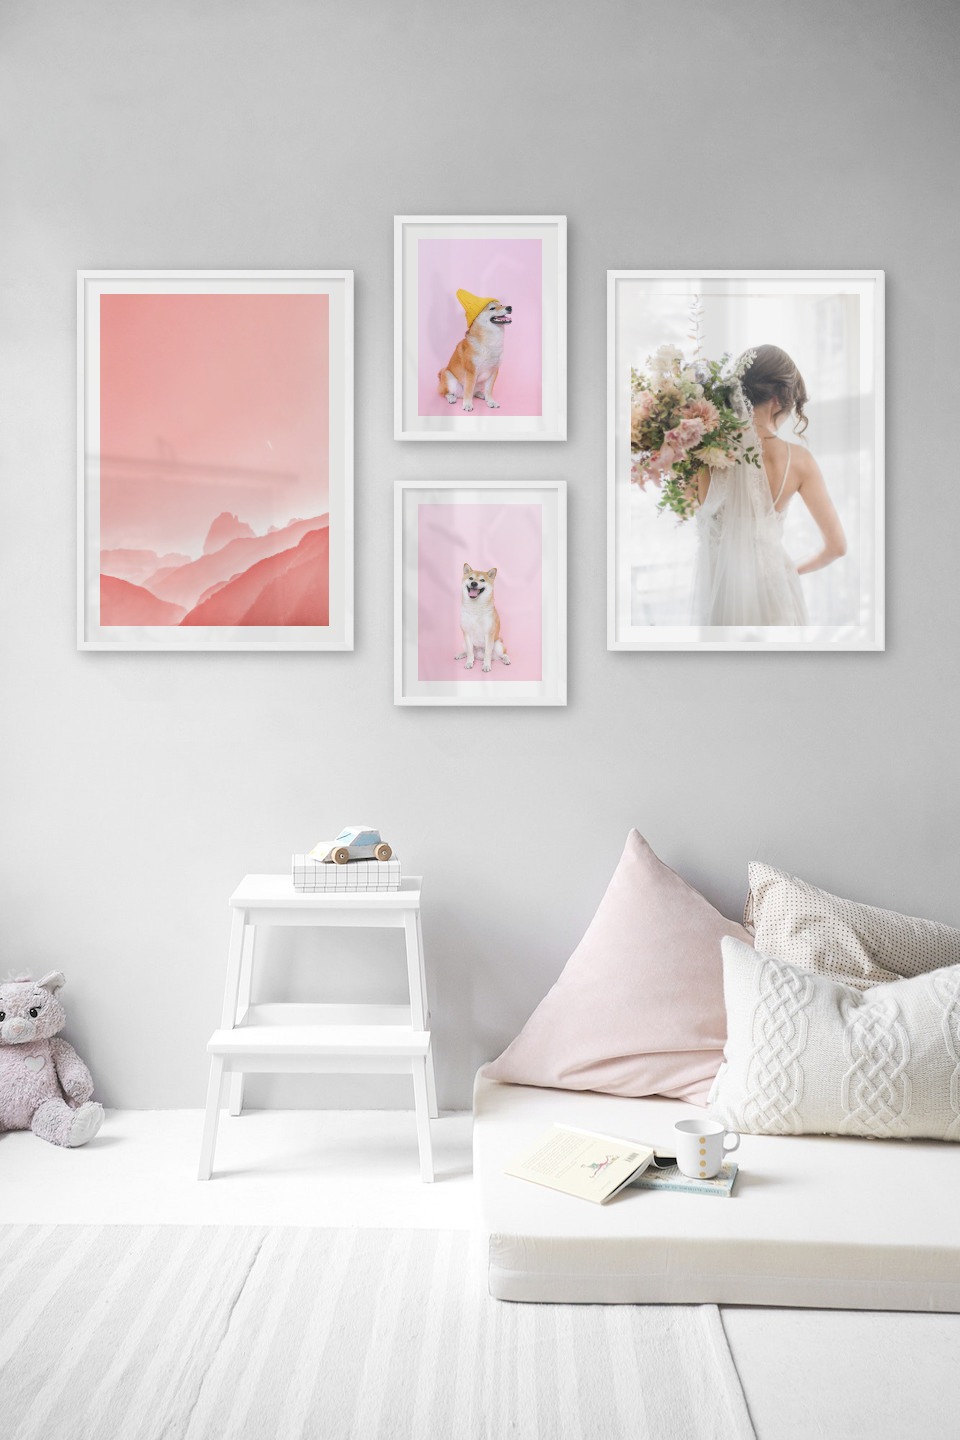 Gallery wall with picture frames in white in sizes 50x70 and 30x40 with prints "Pink sky", "Dog with yellow hat", "Dog" and "Bride and flowers"